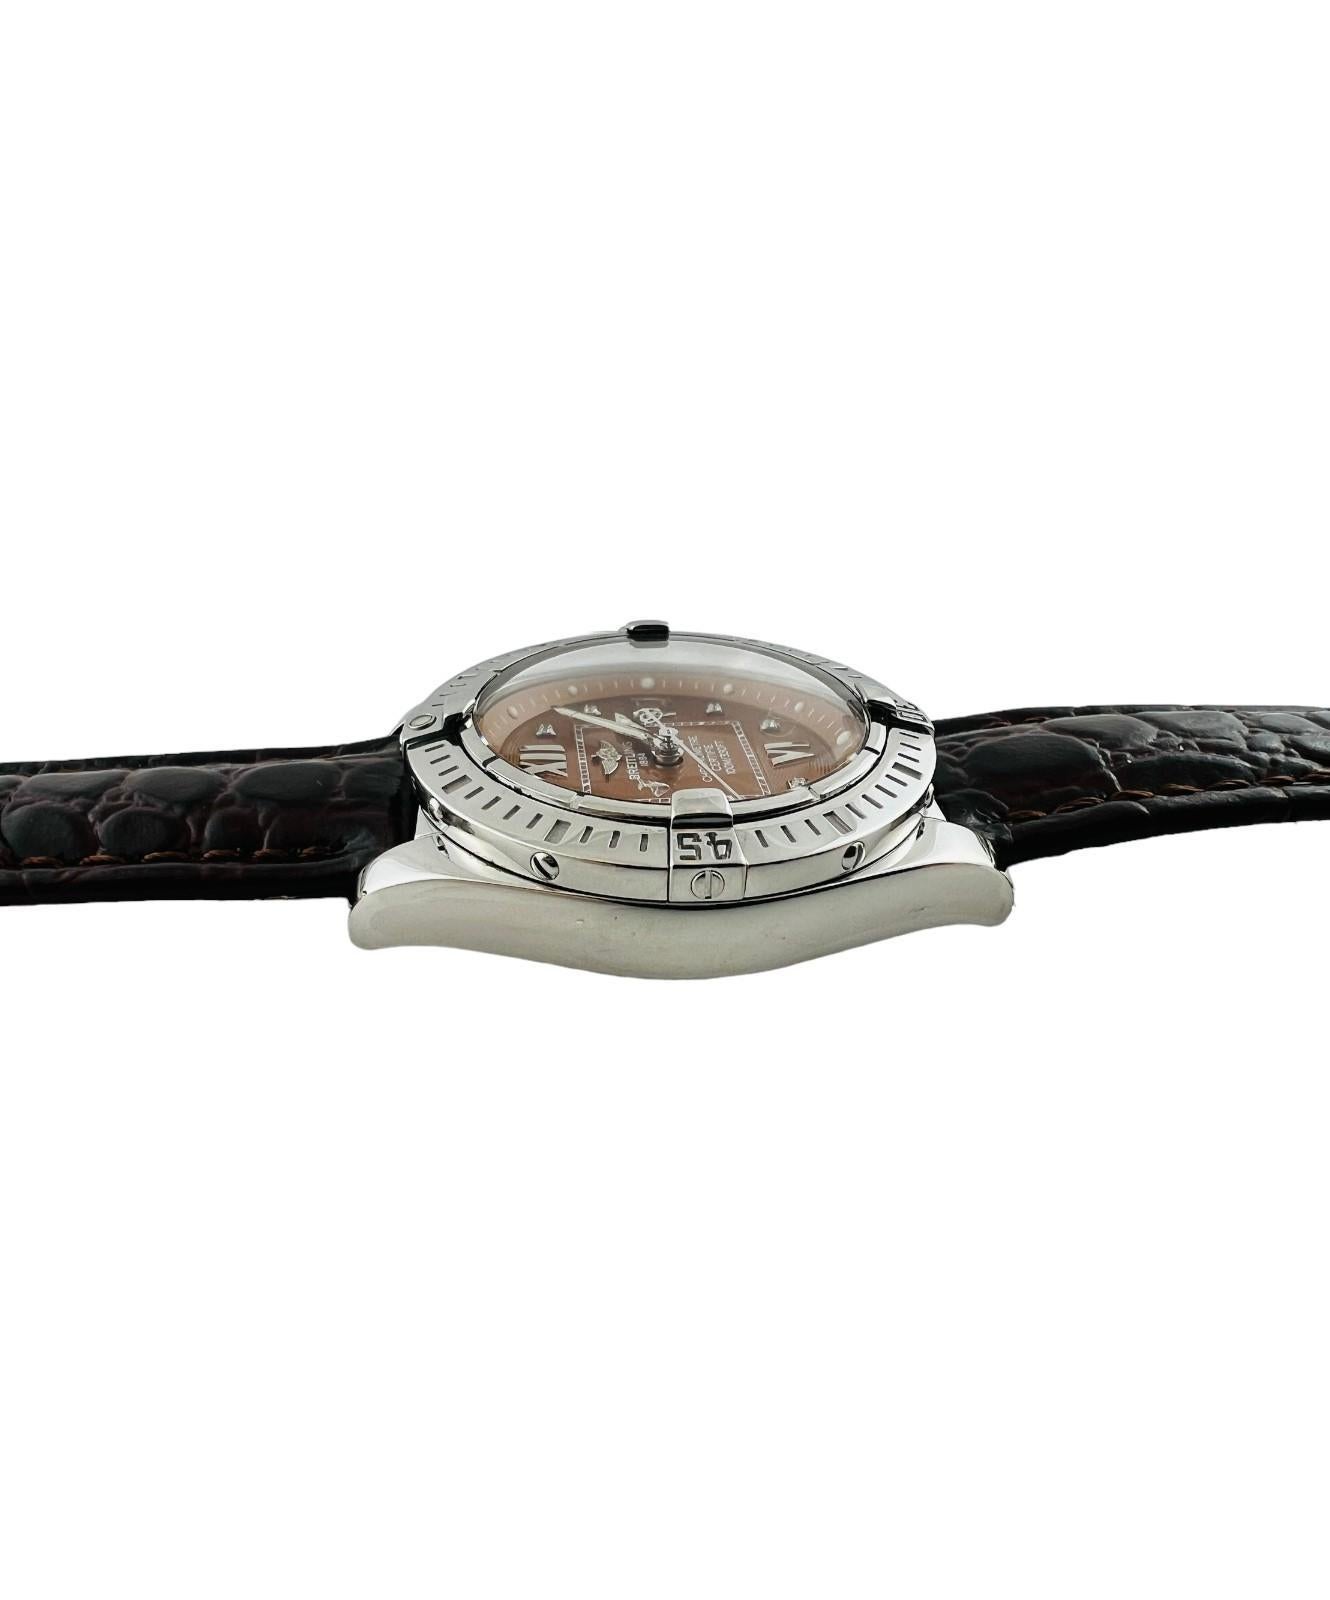 Breitling Cockpit Galactic 32 Ladies Watch

Model: A71356
Serial: 838274

This beautiful ladies Breitling watch is set in a stainless steel case with a diamond copper color dial

Case is 32mm

Quartz movement

New Brown leather band - not